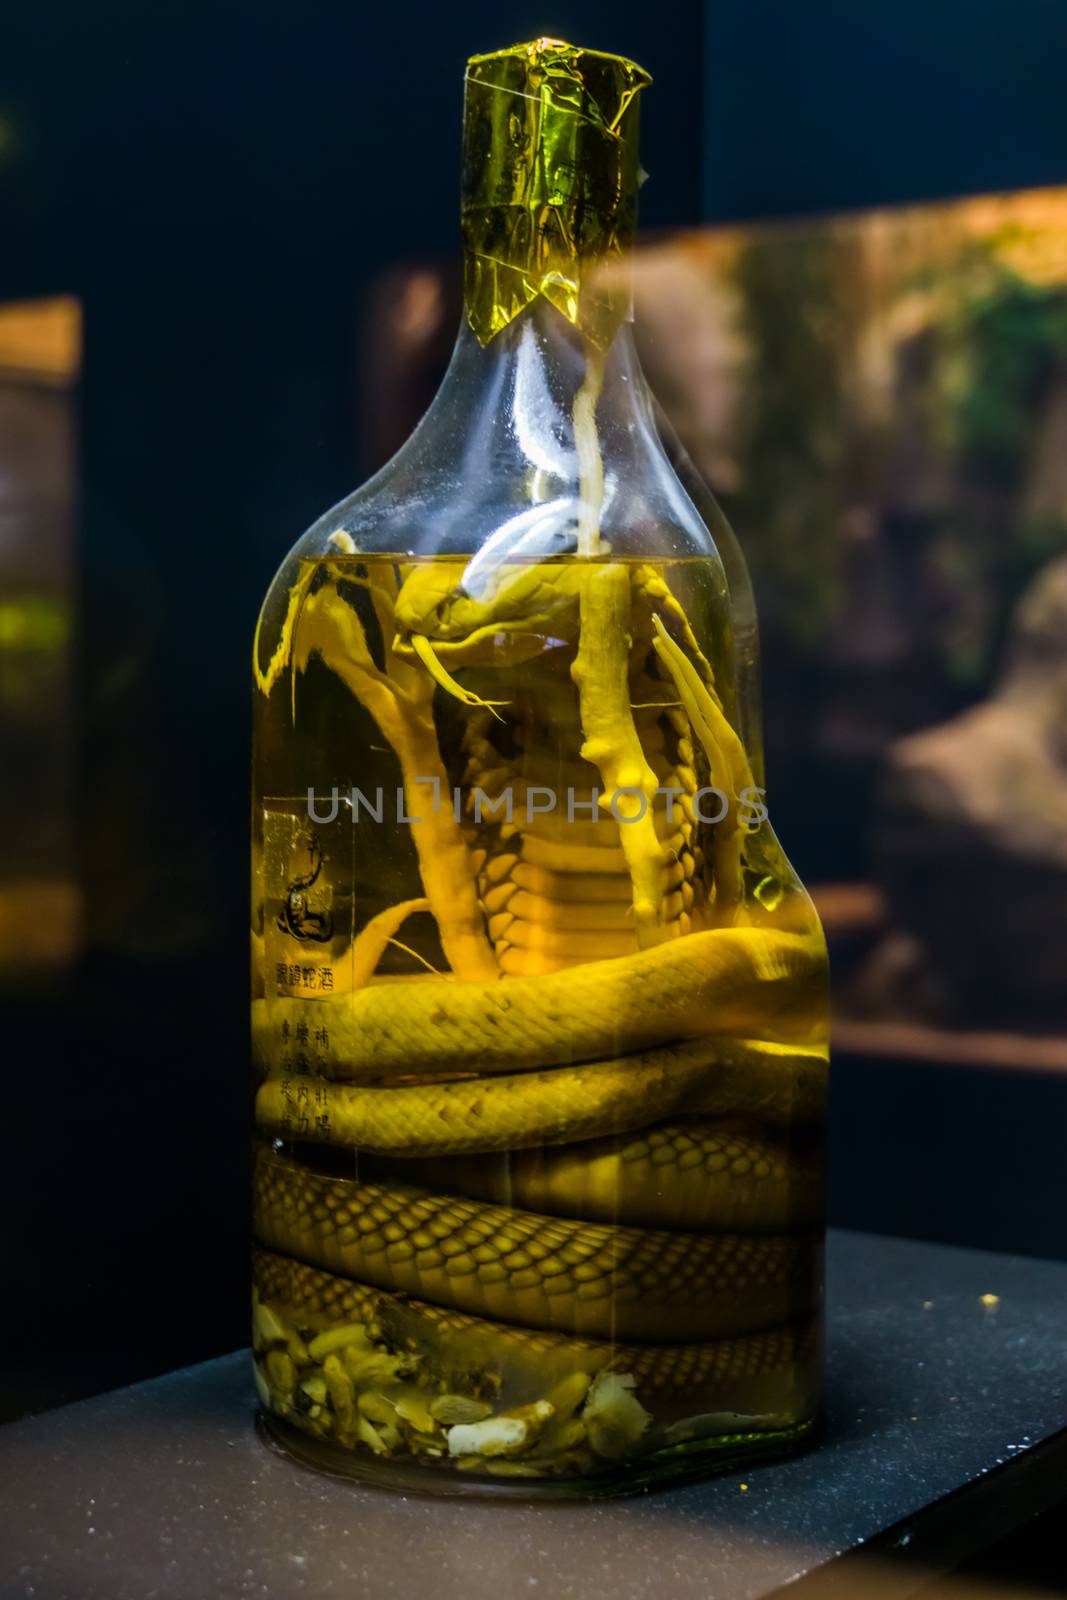 preserved snake in a bottle, educative objects for herpetology, creepy home decorations